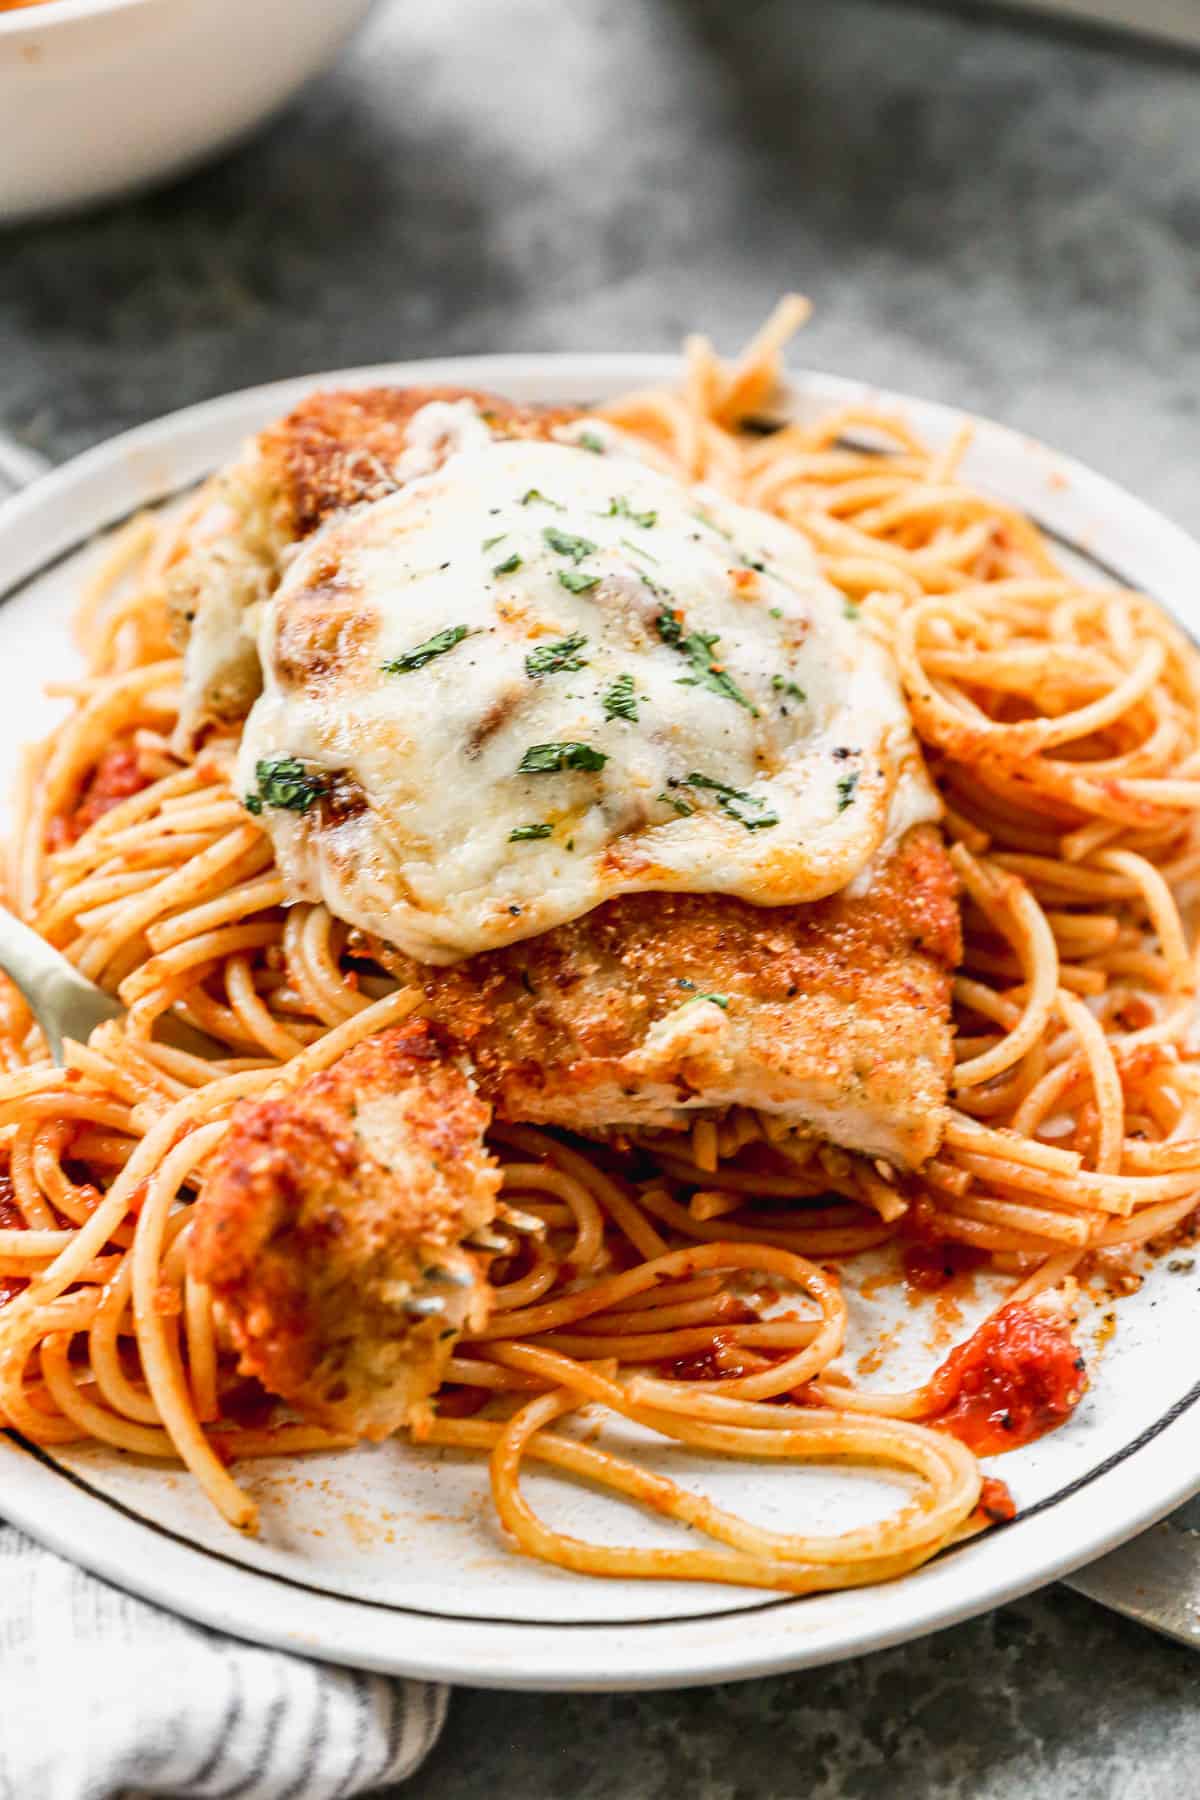 A close up image of homemade Chicken Parmesan, with a fork scooping up a bite.